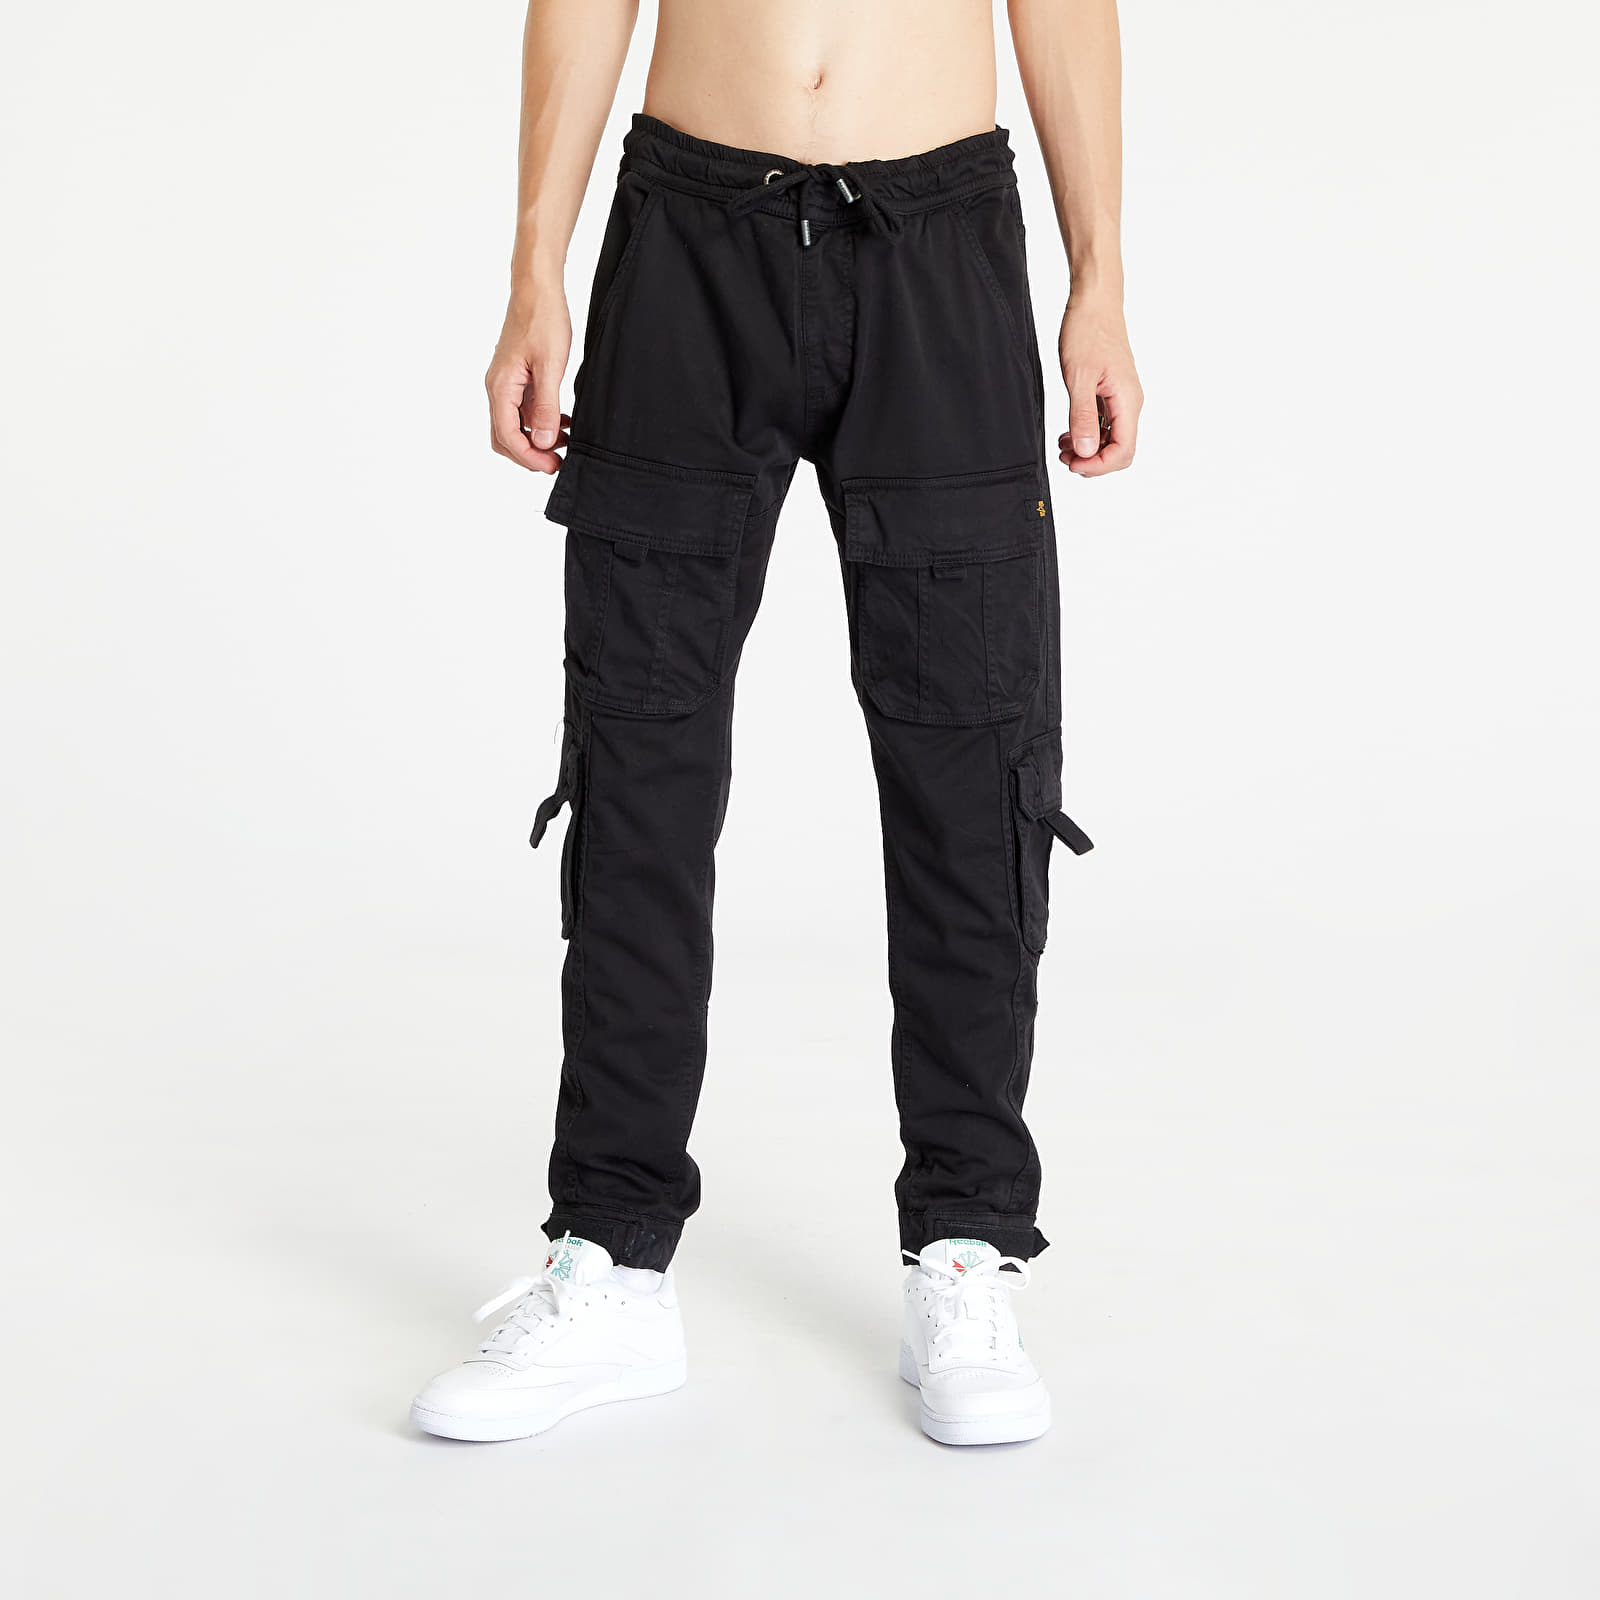 Black Industries | and Pant Queens jeans Alpha Sergeant Jogger Pants